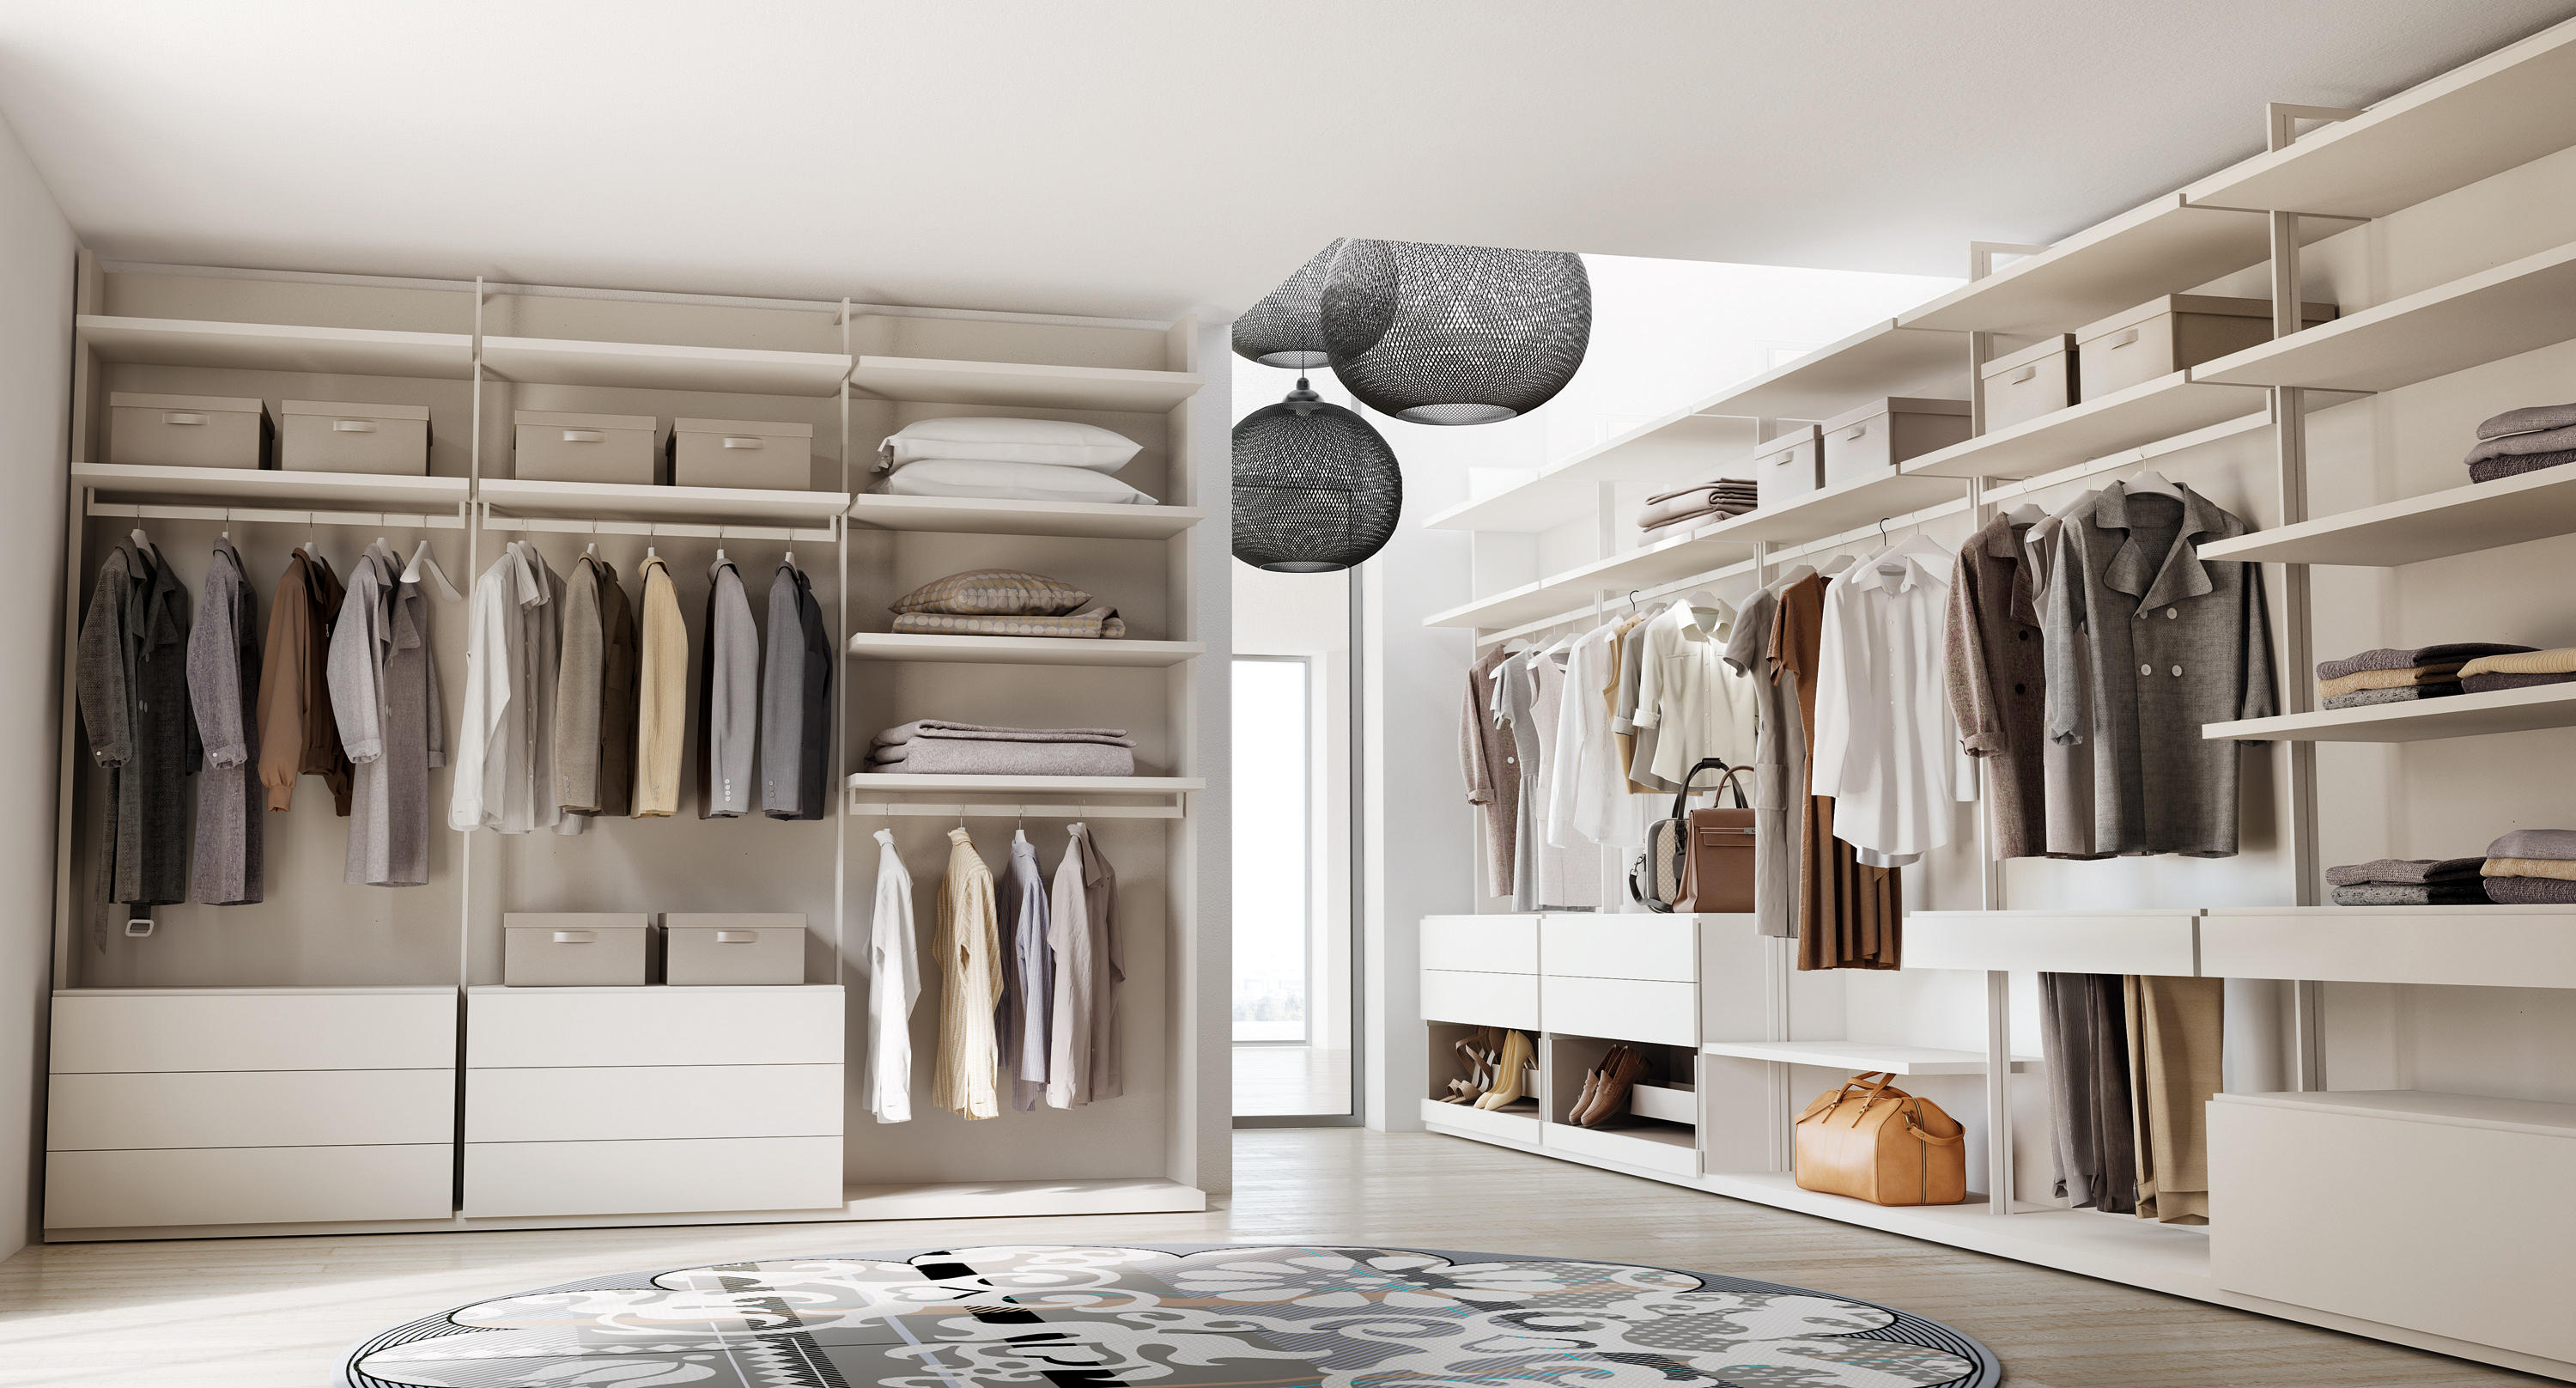 CABINA DR | DRESSING ROOM - Walk-in wardrobes from CACCARO | Architonic